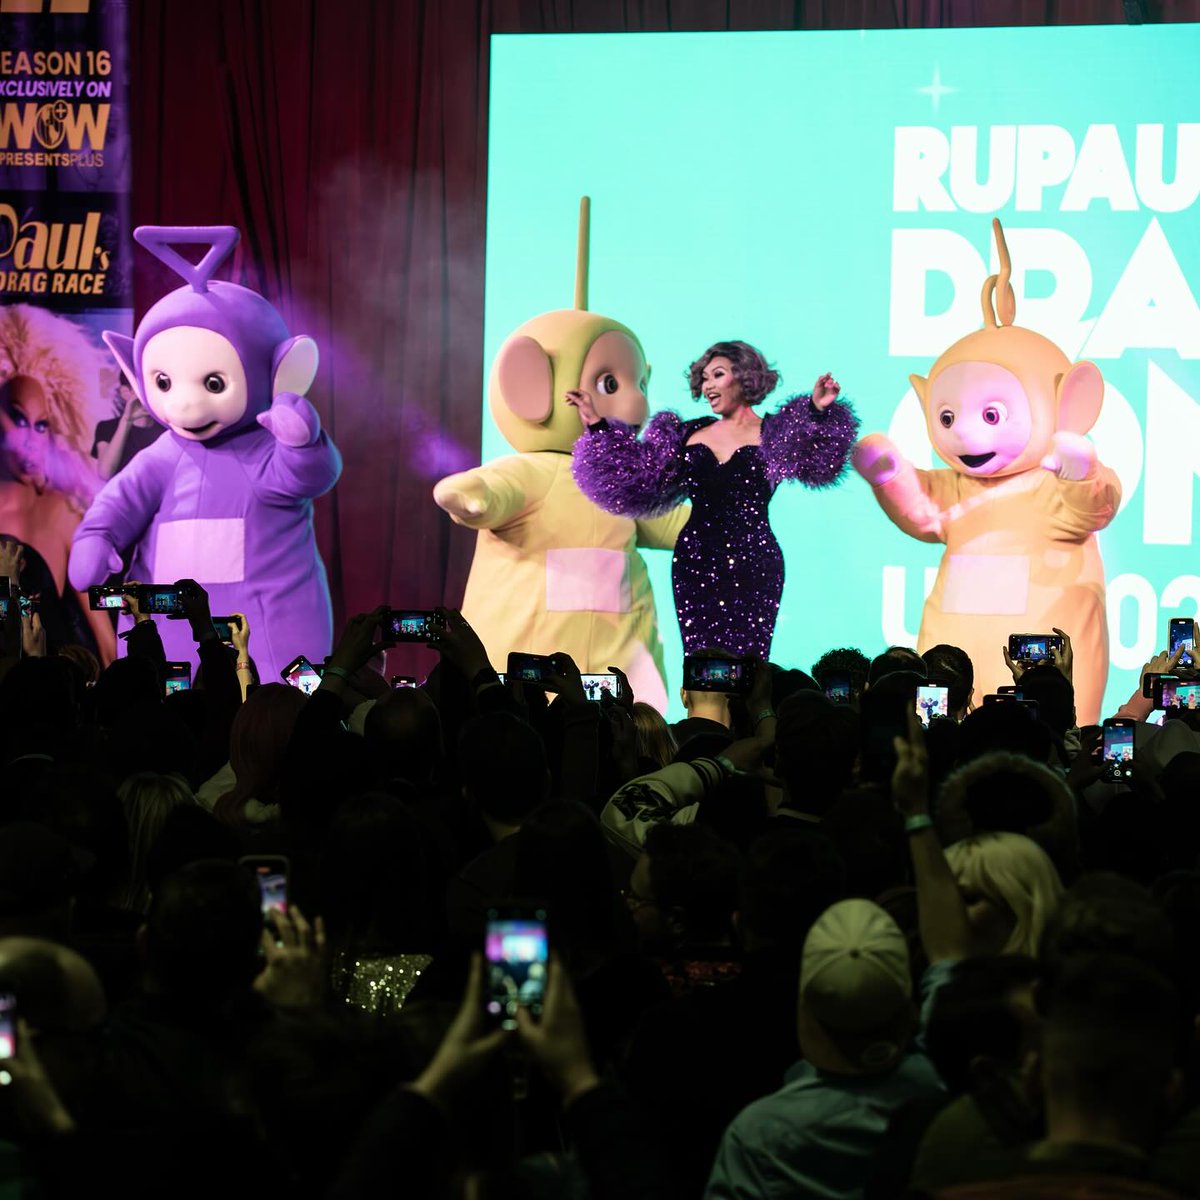 Meow meow, Teletubbies! 💜💚💛❤️ Throwback to @jujuboston’s legendary performance with the @teletubbieshq on the #DragCon UK Main Stage last month! 🎟️ @rupaulsdragcon LA tickets on sale now at rupaulsdragcon.com